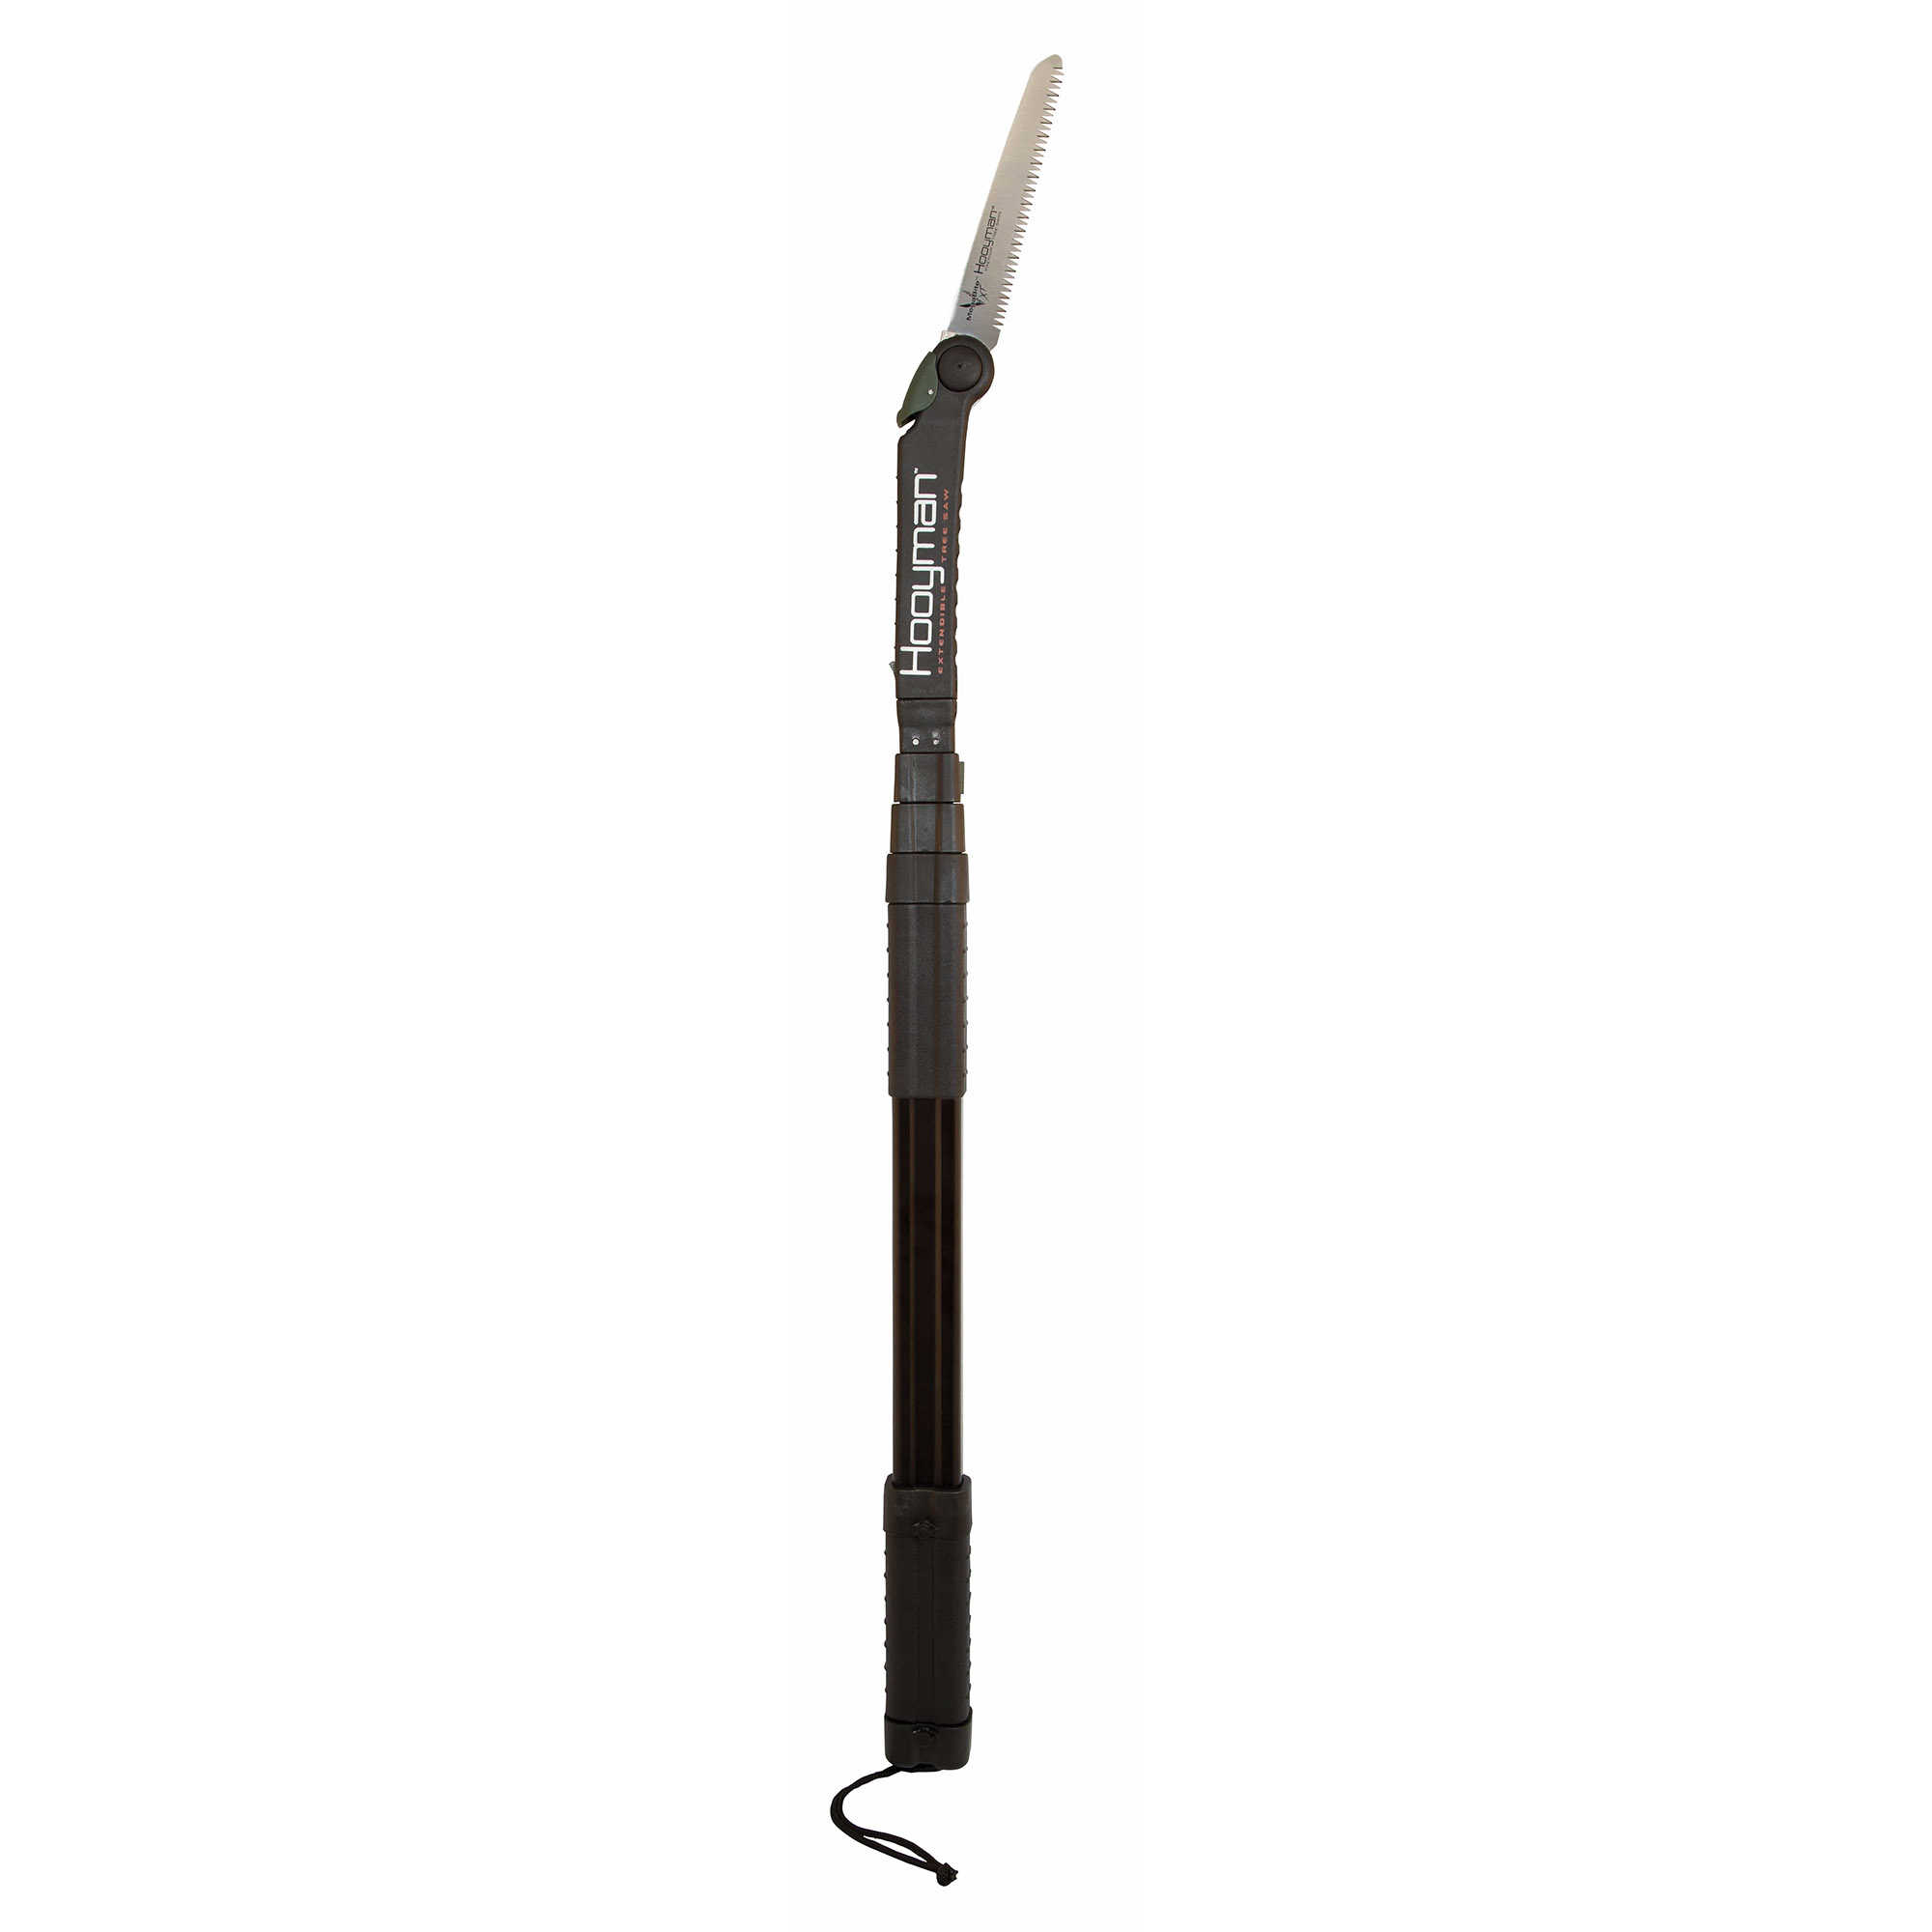 Hooyman Extendable Tree Saw 10' with Sling